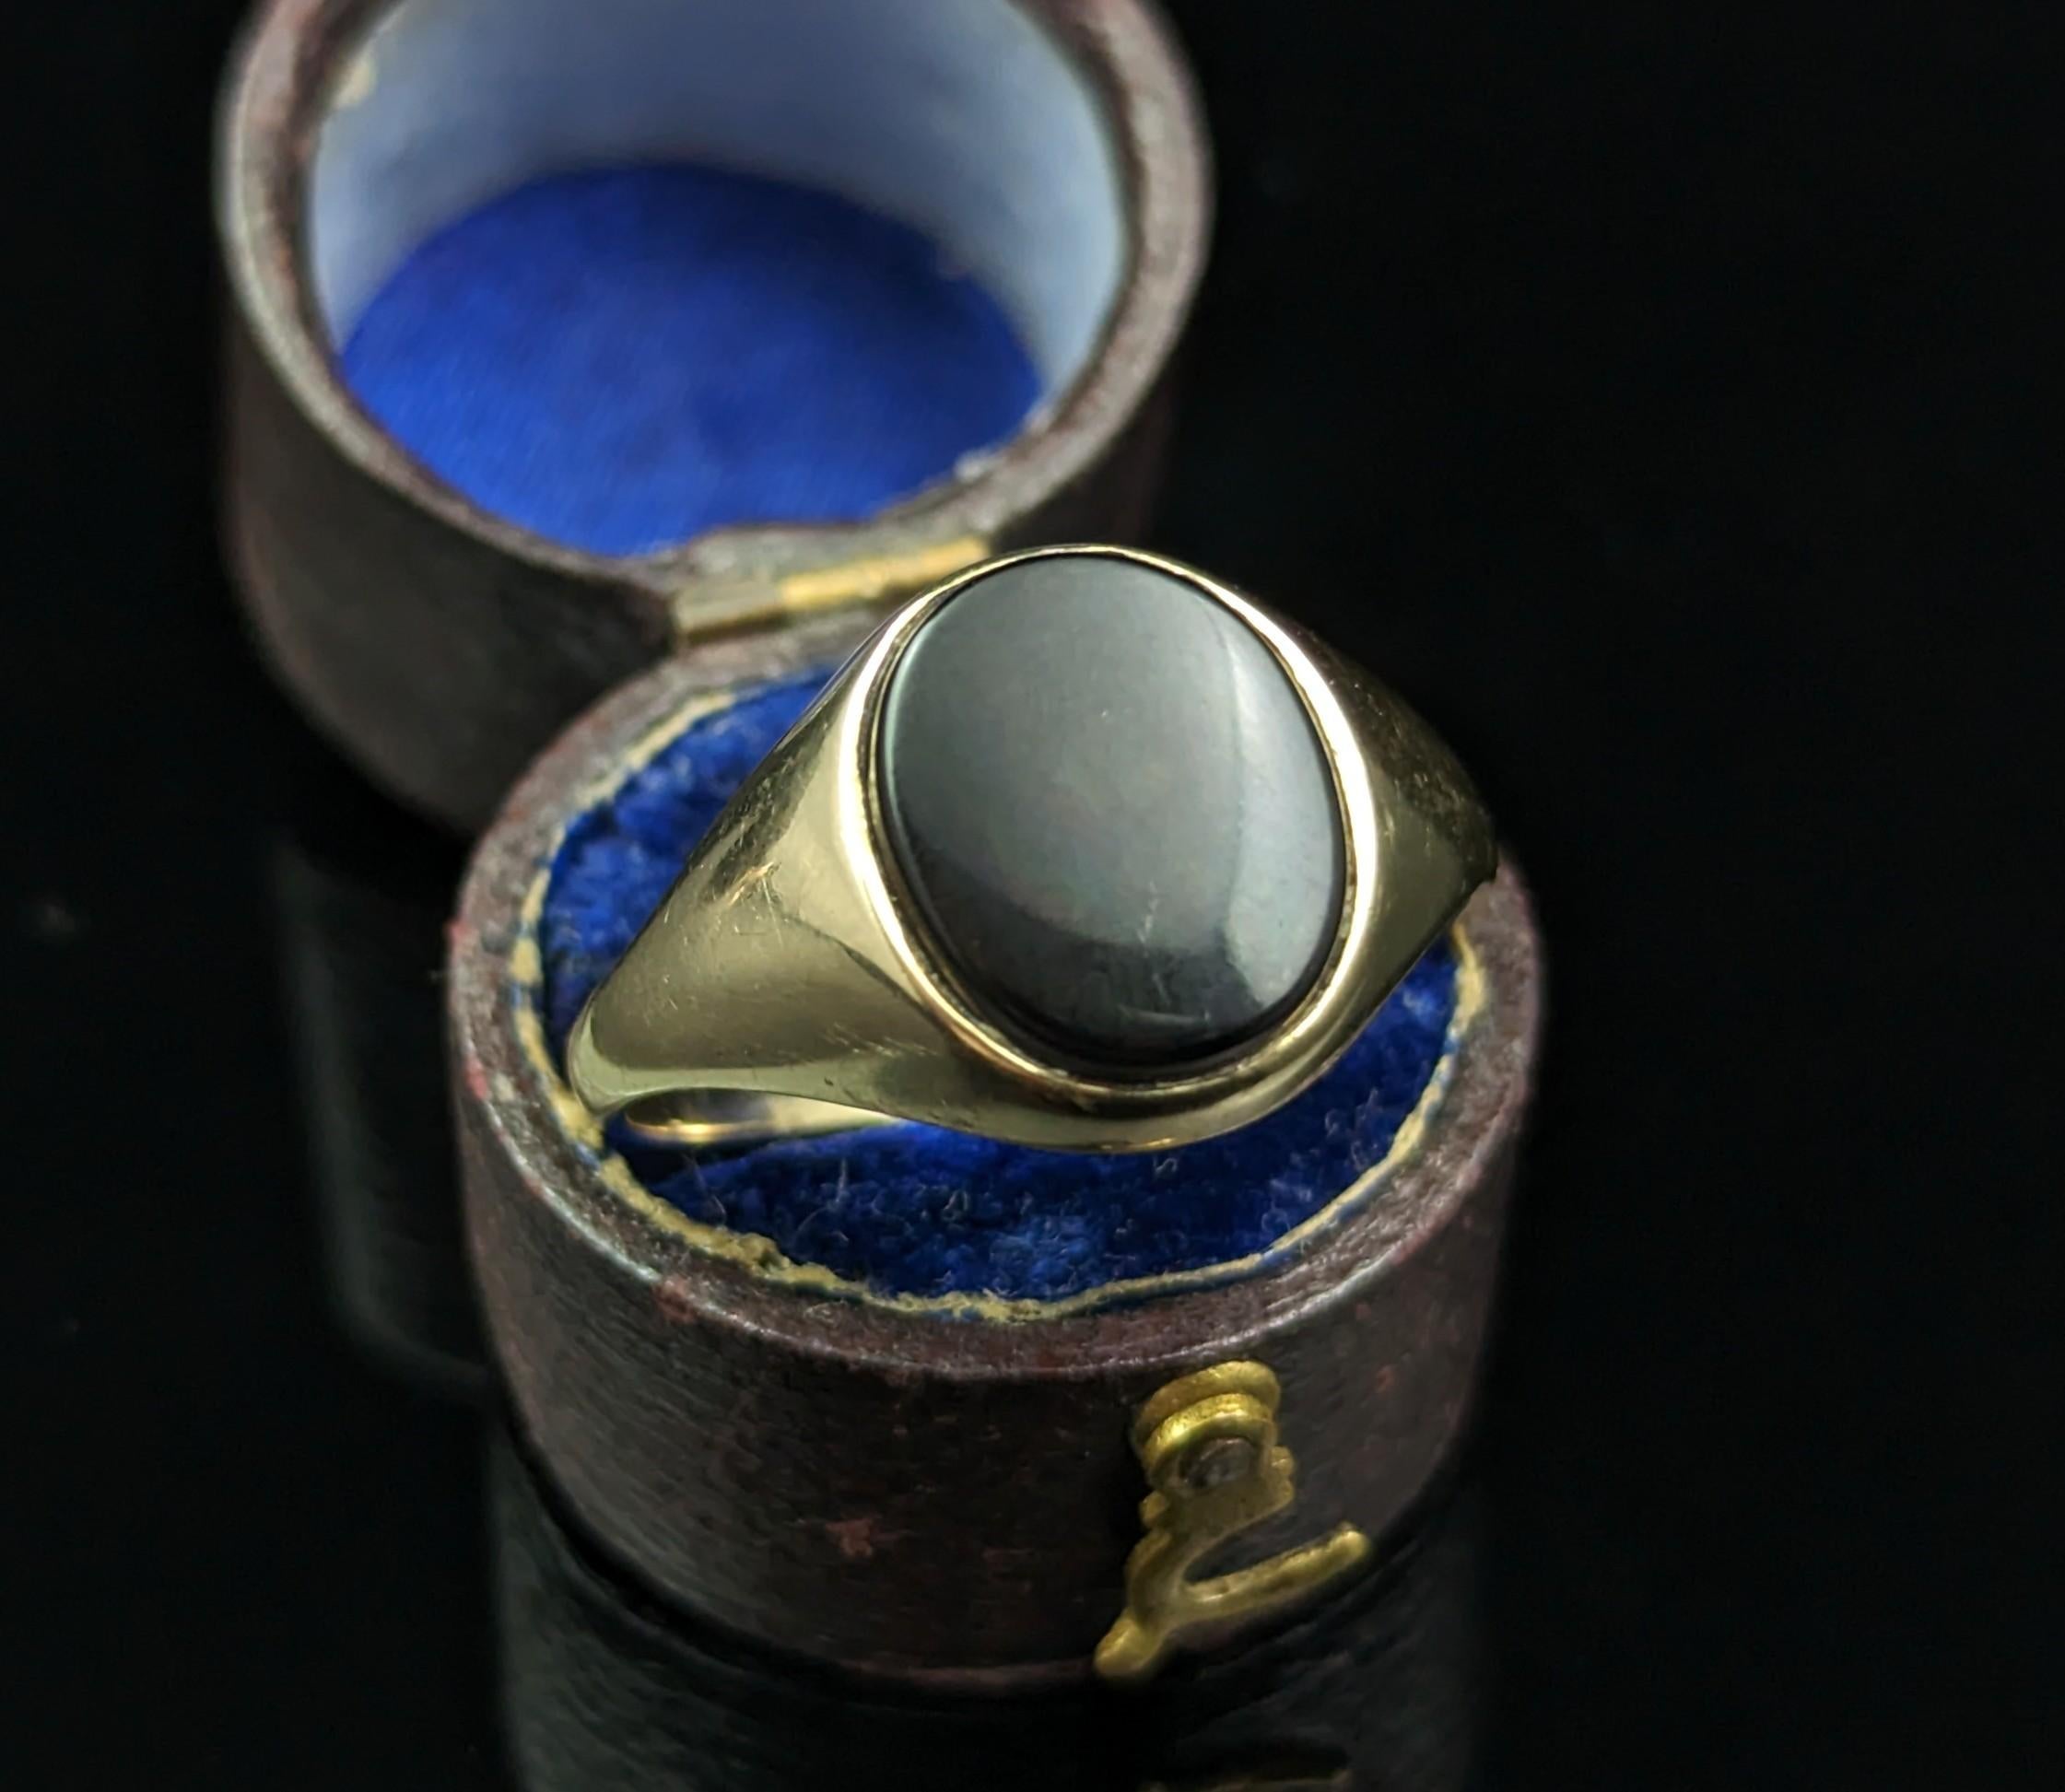 This stylish vintage 9kt gold and Black onyx signet ring is the perfect pinky ring choice!

It has an oval shaped face set with a rich inky black onyx stone, this has not been carved so the stone could be personalised if desired with your initials